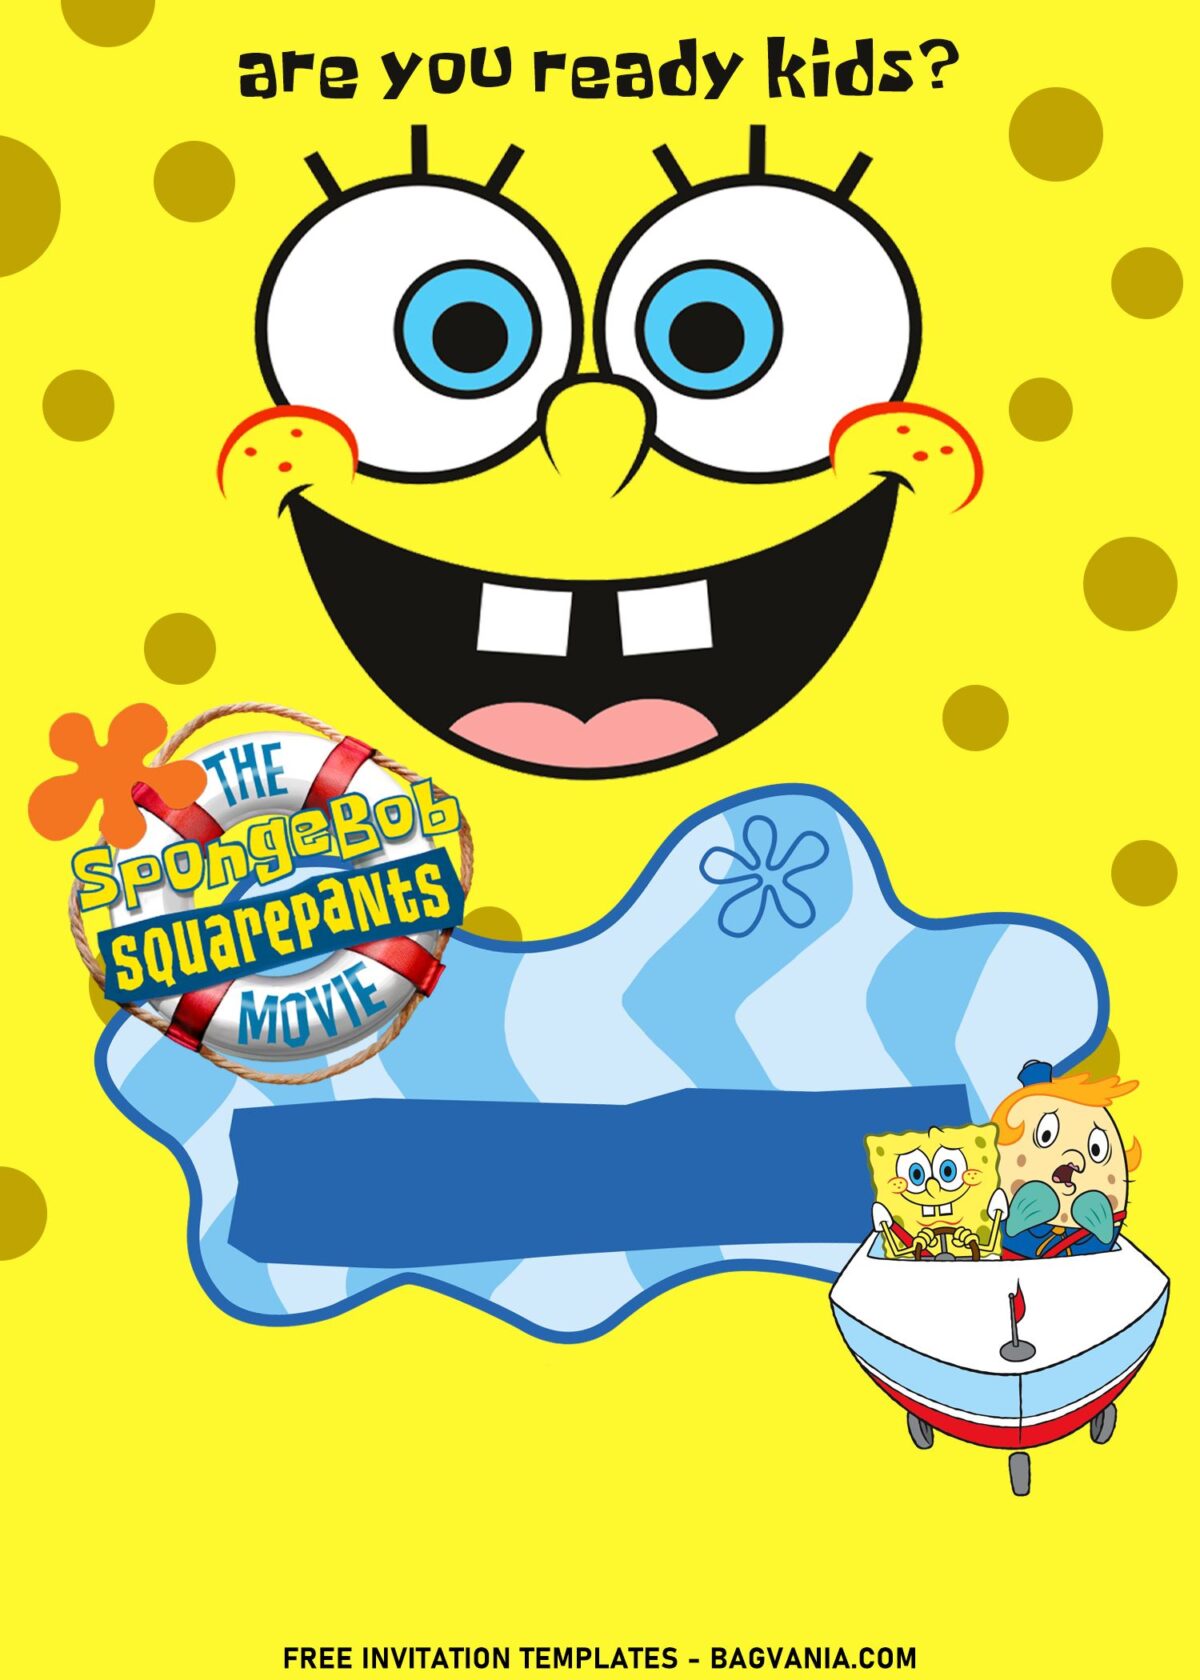 11+ Bright And Colorful SpongeBob Birthday Invitation Templates with Mrs. Puff and SpongeBob in driving class